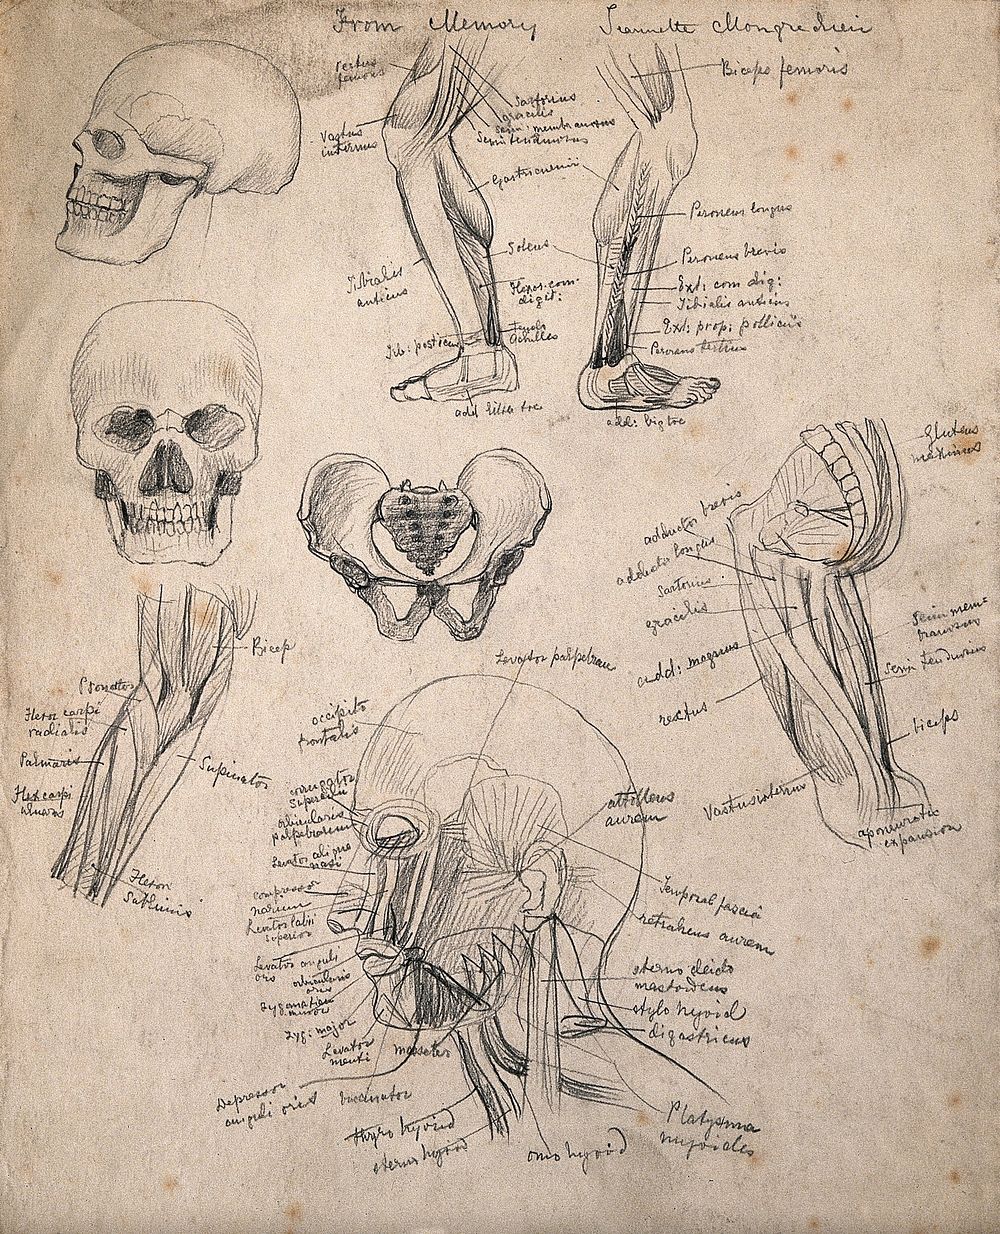 Bones and muscles of the head, leg and pelvis: eight figures. Pencil drawing by J. Mongrédien, ca. 1880.